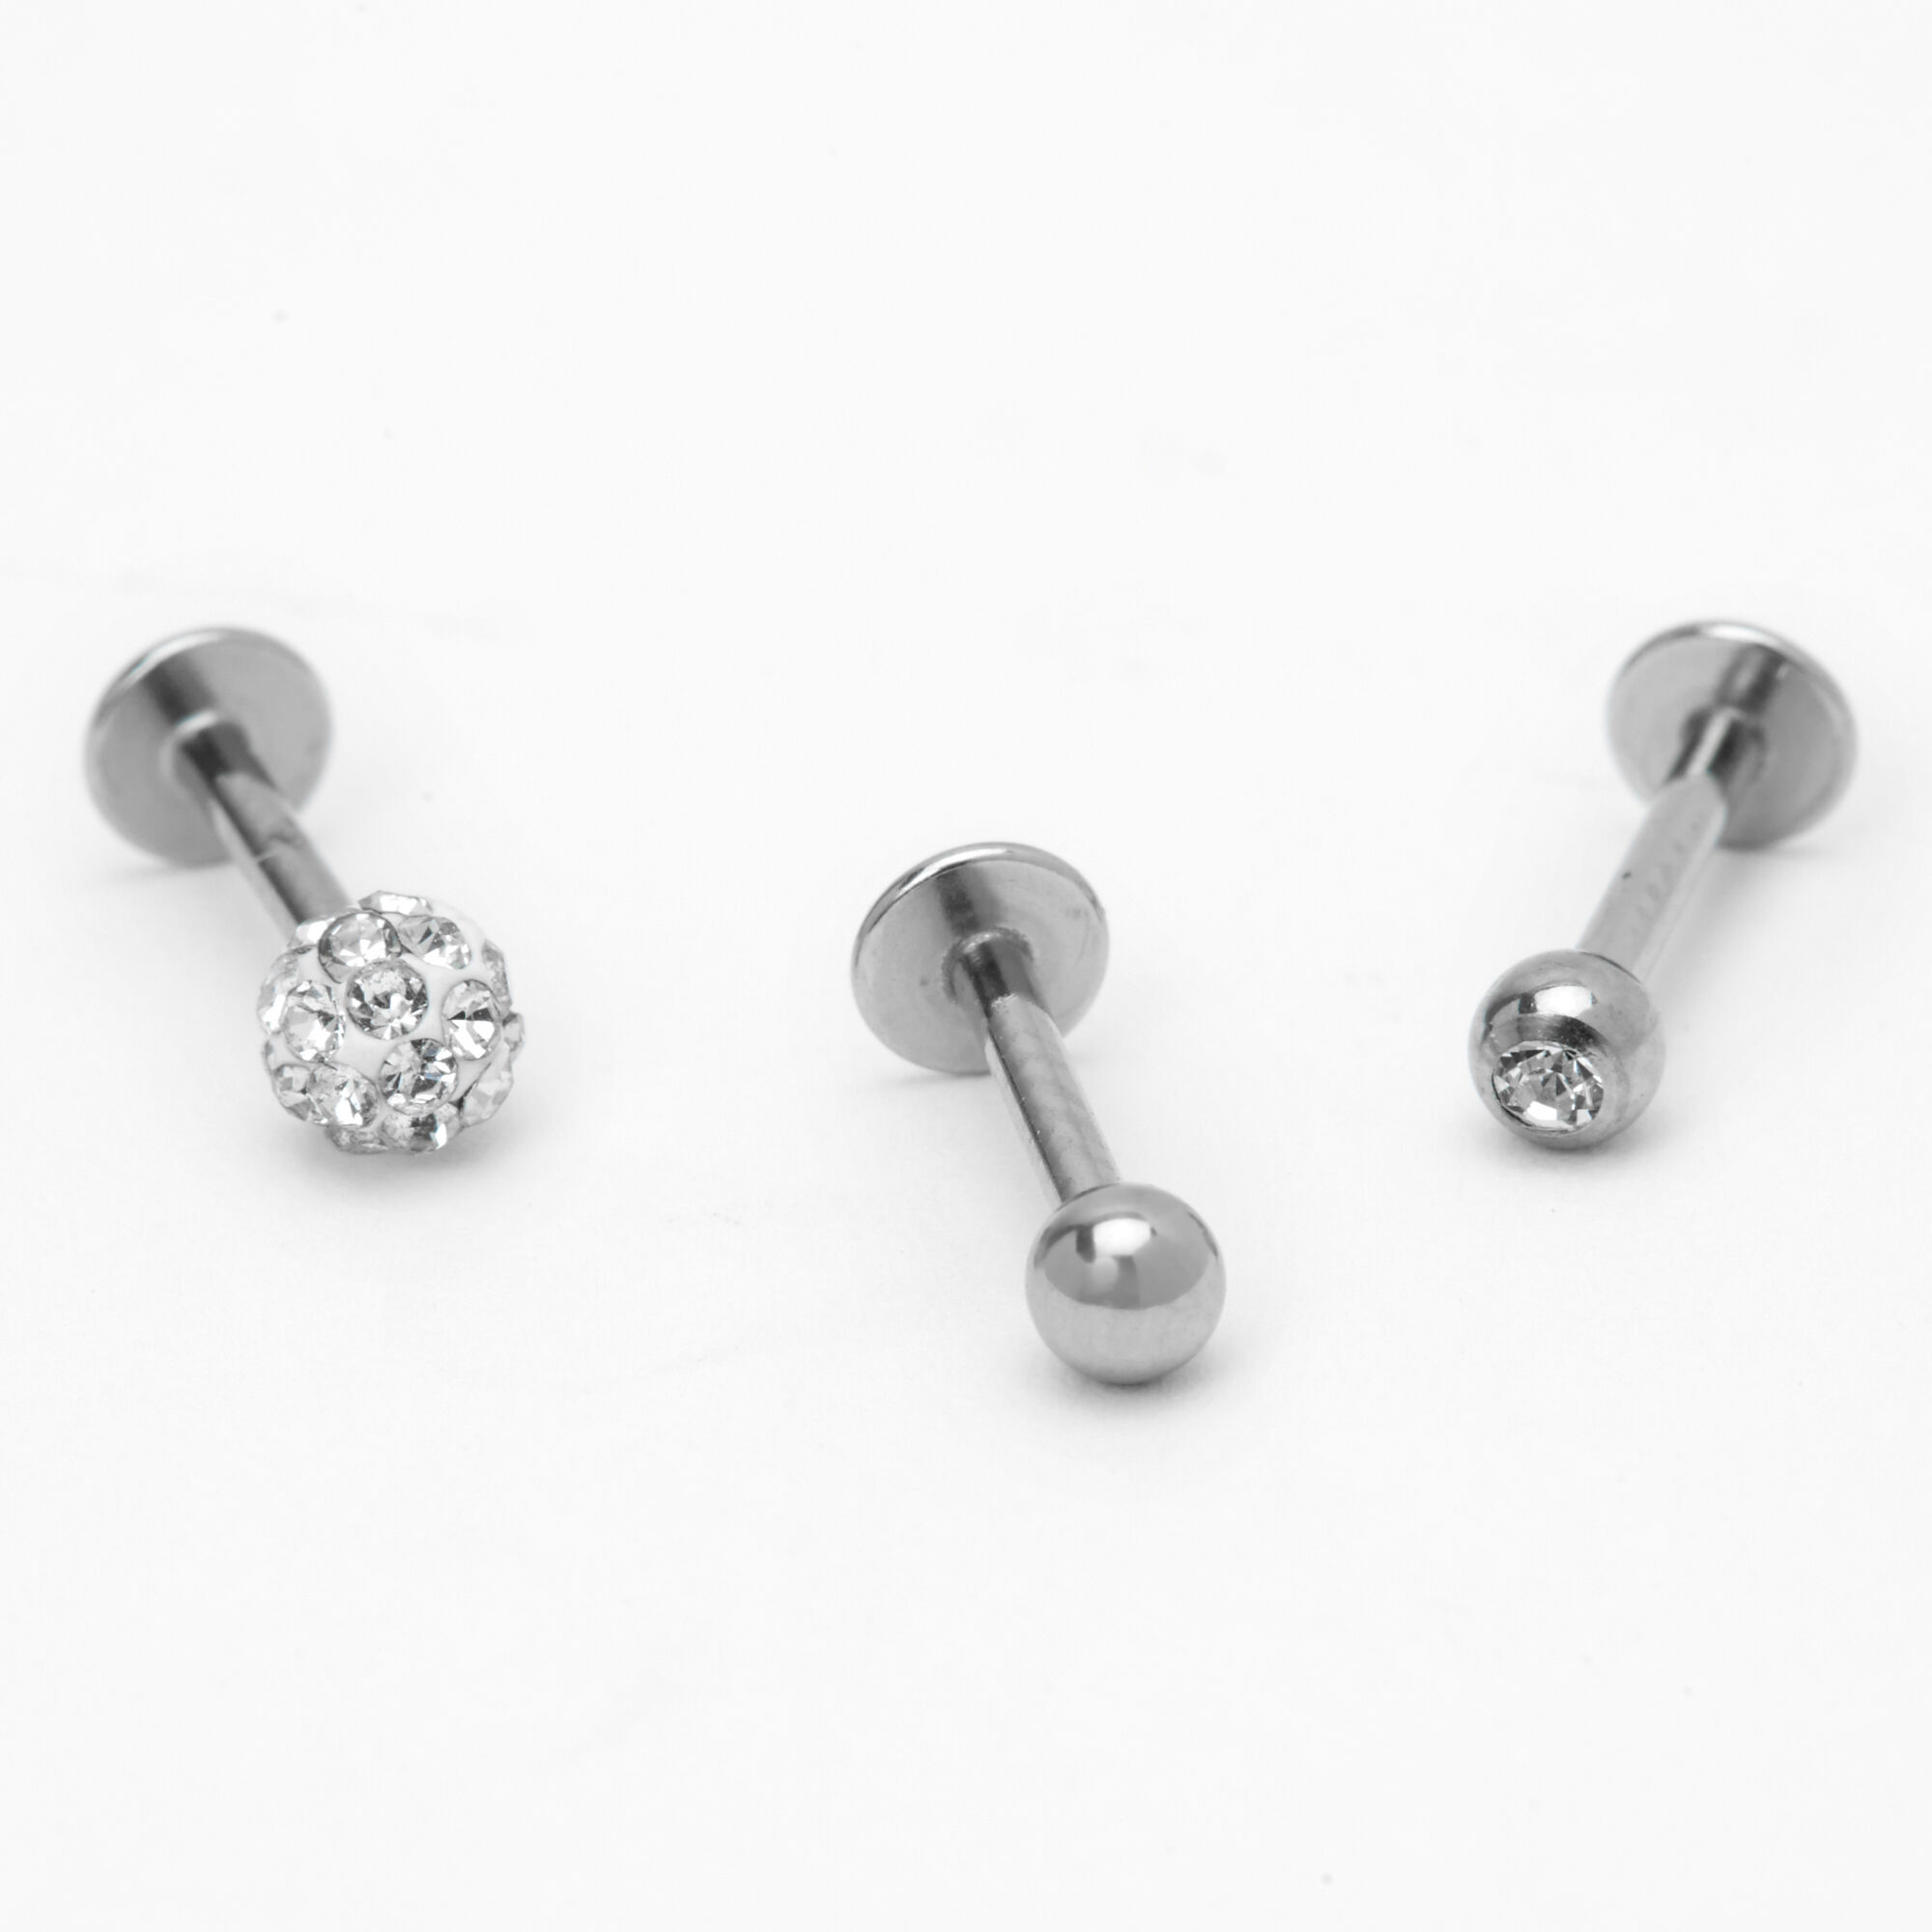 View Claires Tone 16G Crystal Fireball Helix Stud Earrings 3 Pack Silver information